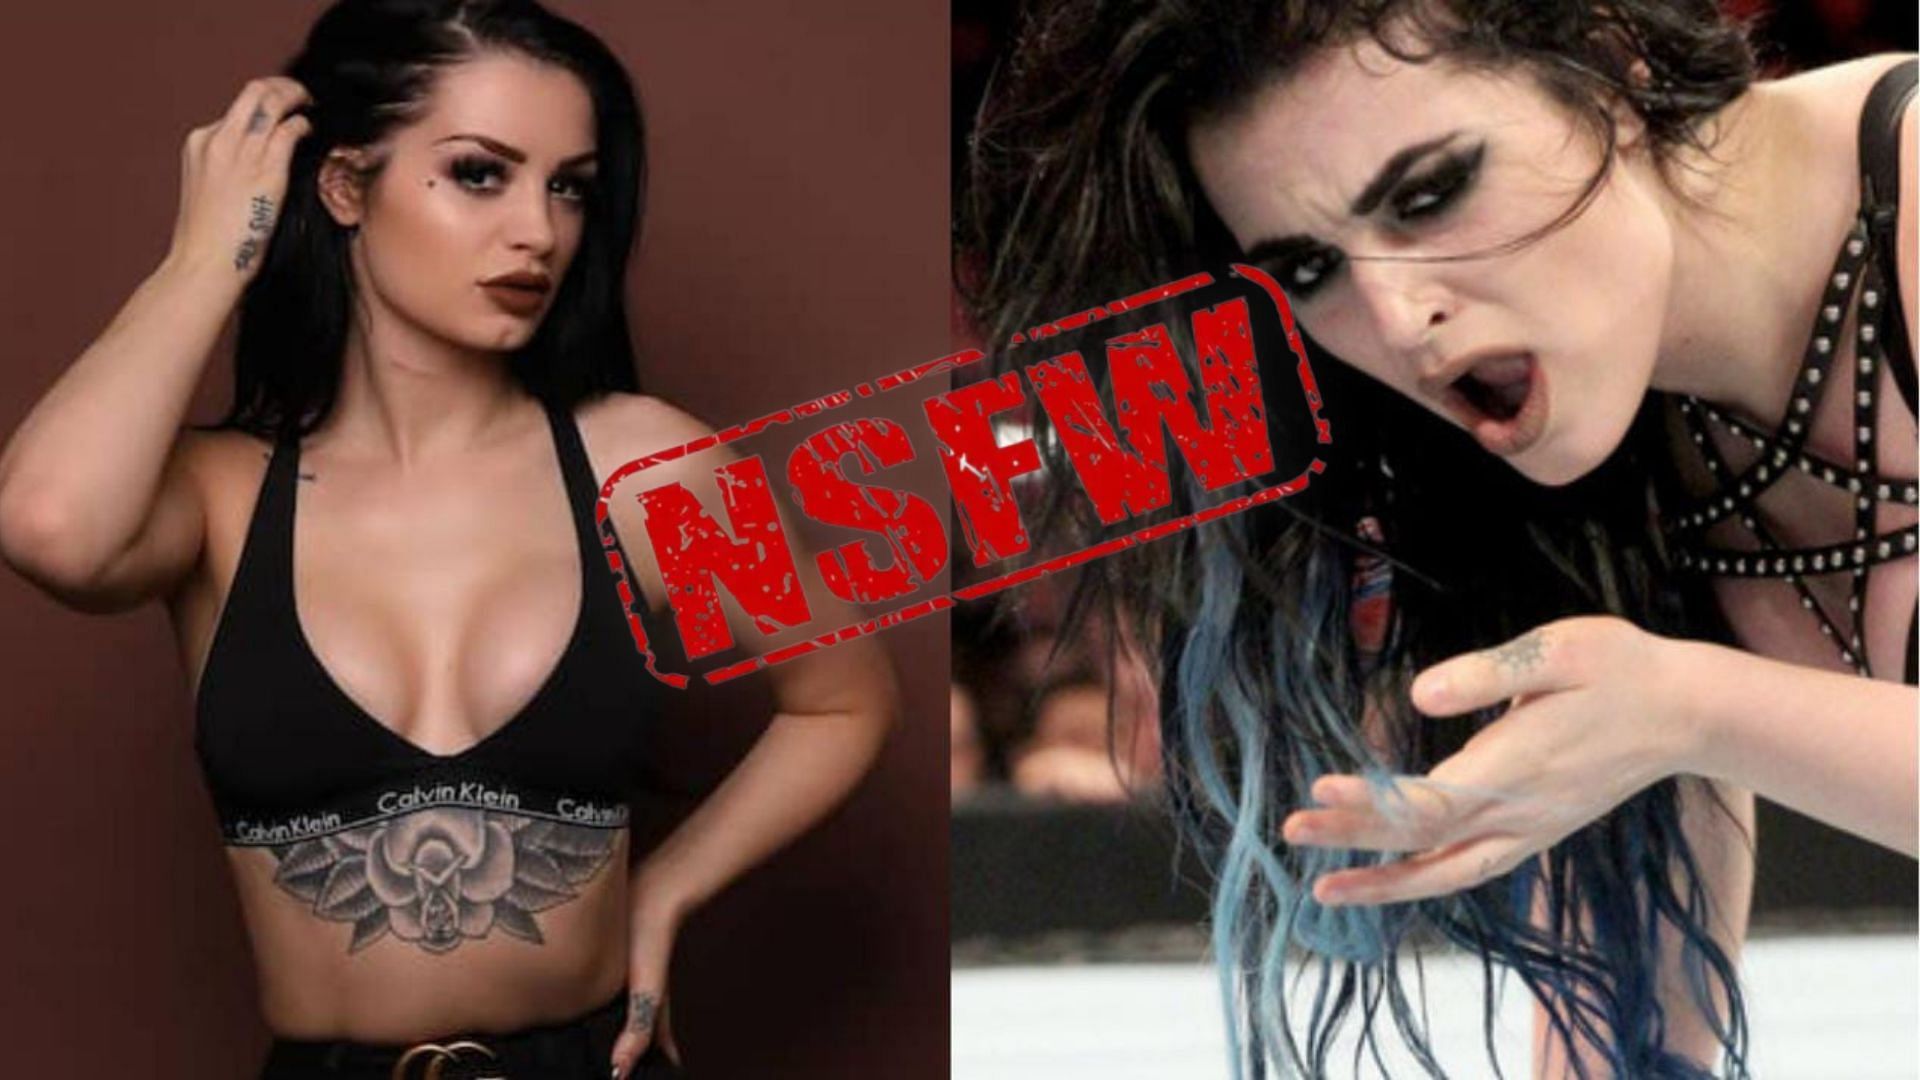 Best of Wwe diva paige leaked photos